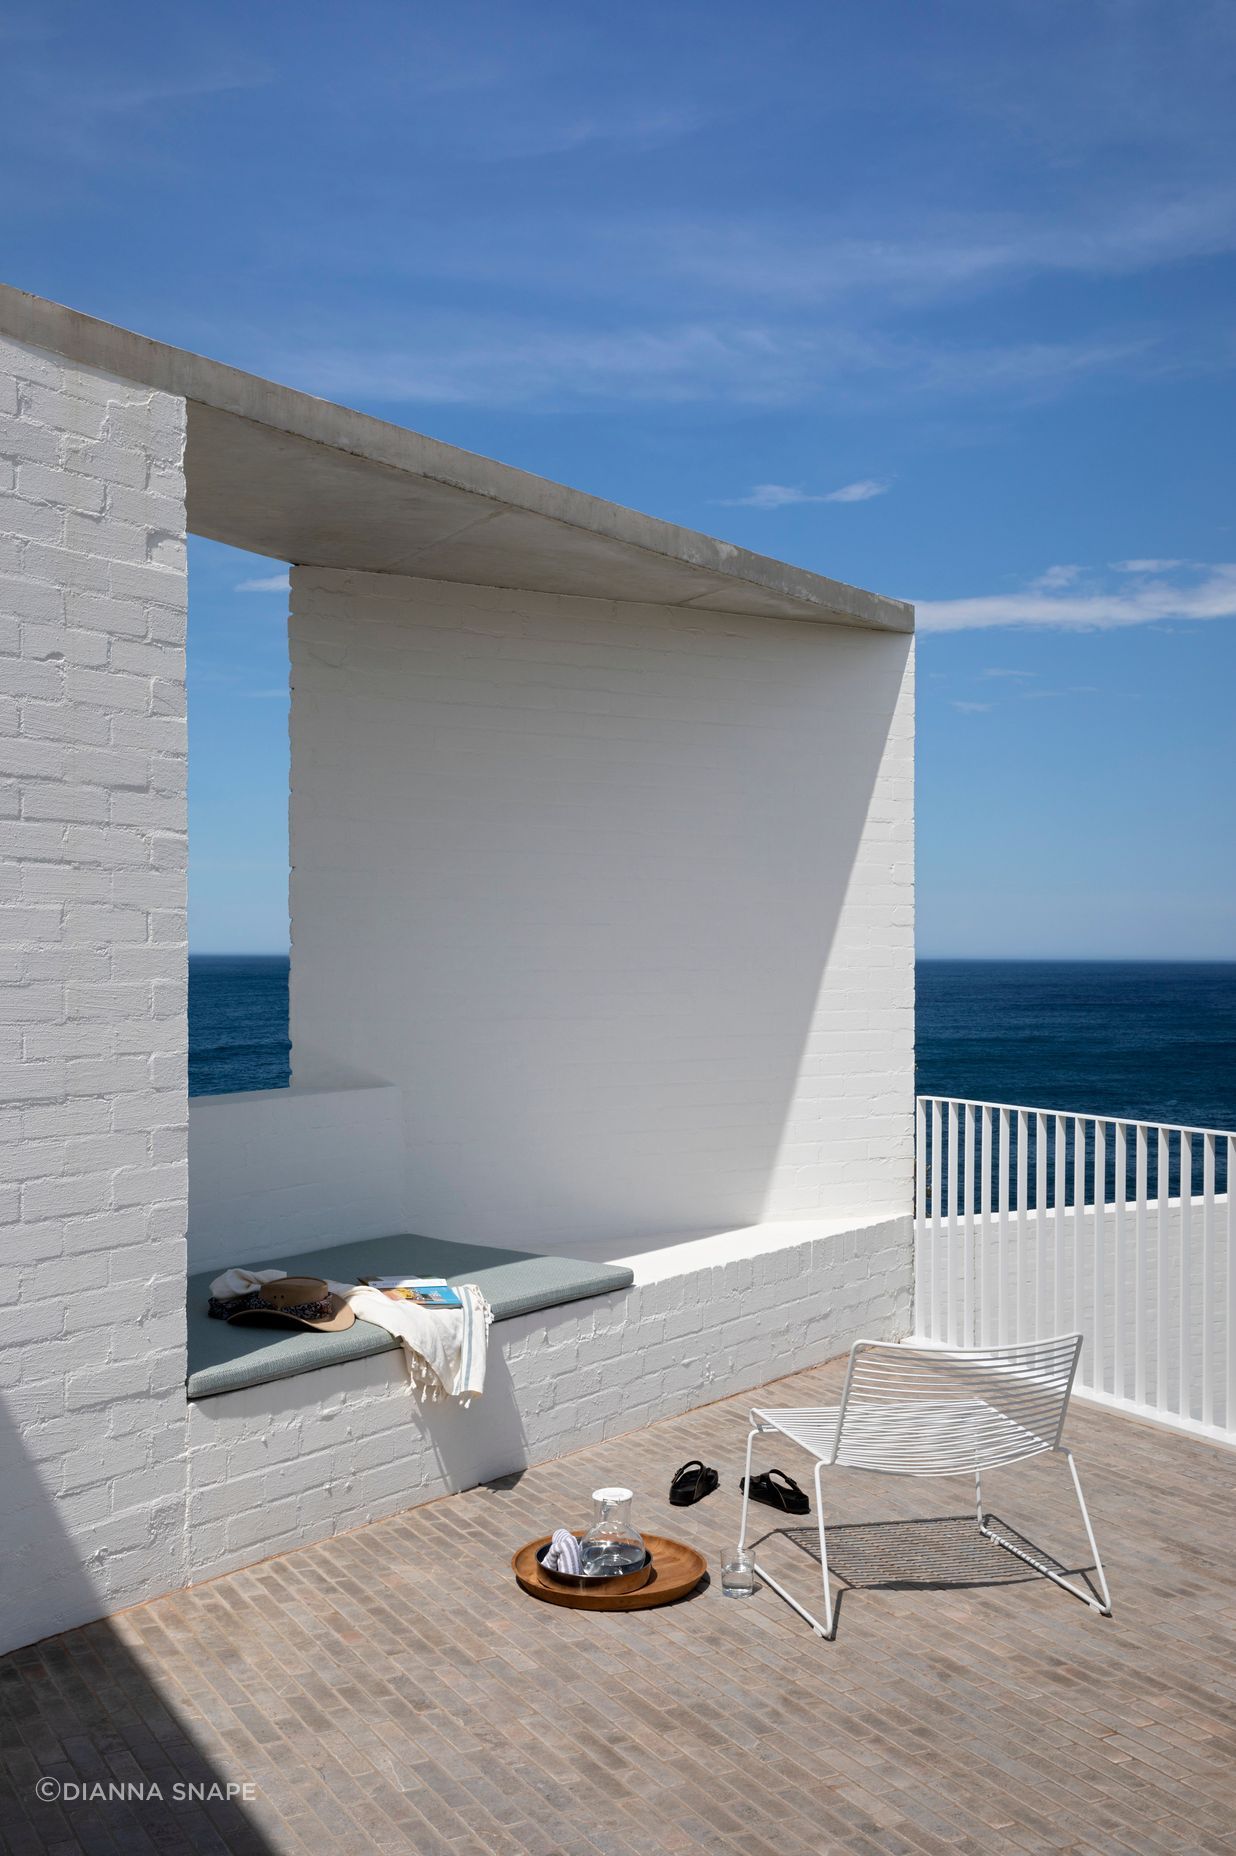 The generous terrace on the top floor features a built in daybed where the owner can enjoy the warm sunny days.